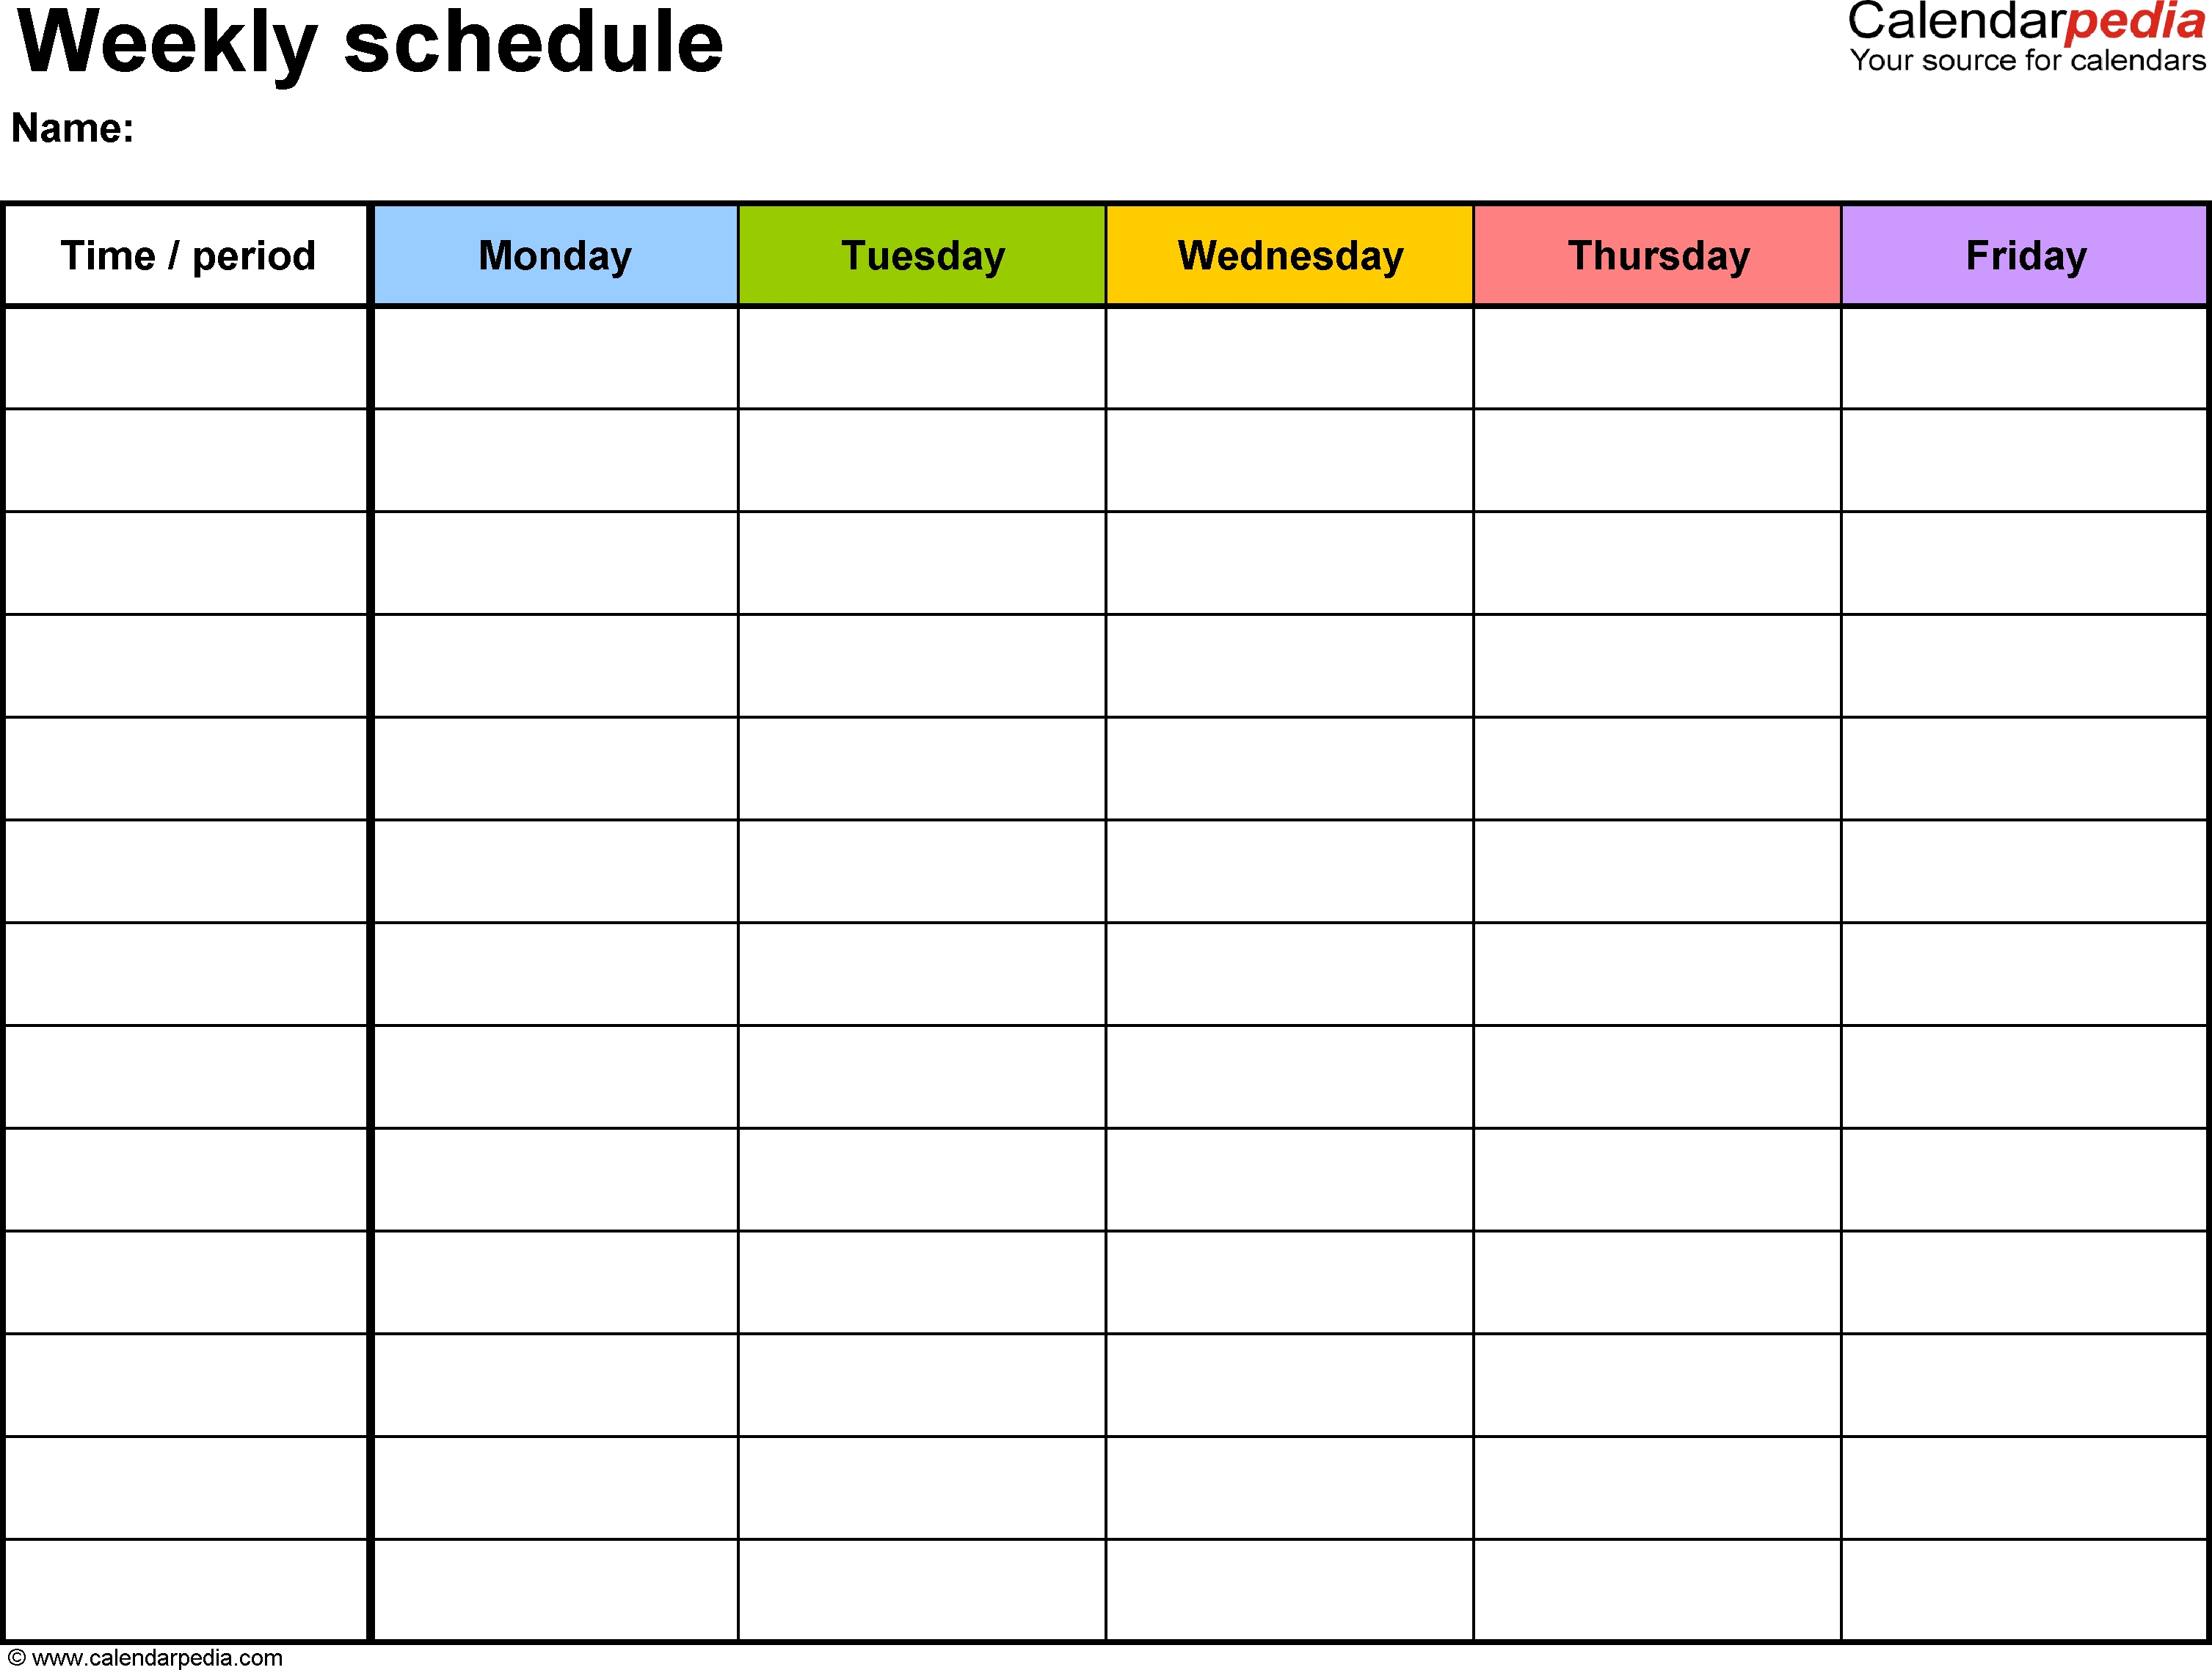 Free Weekly Schedule Templates For Excel - 18 Templates pertaining to Free Day To Day Calendar